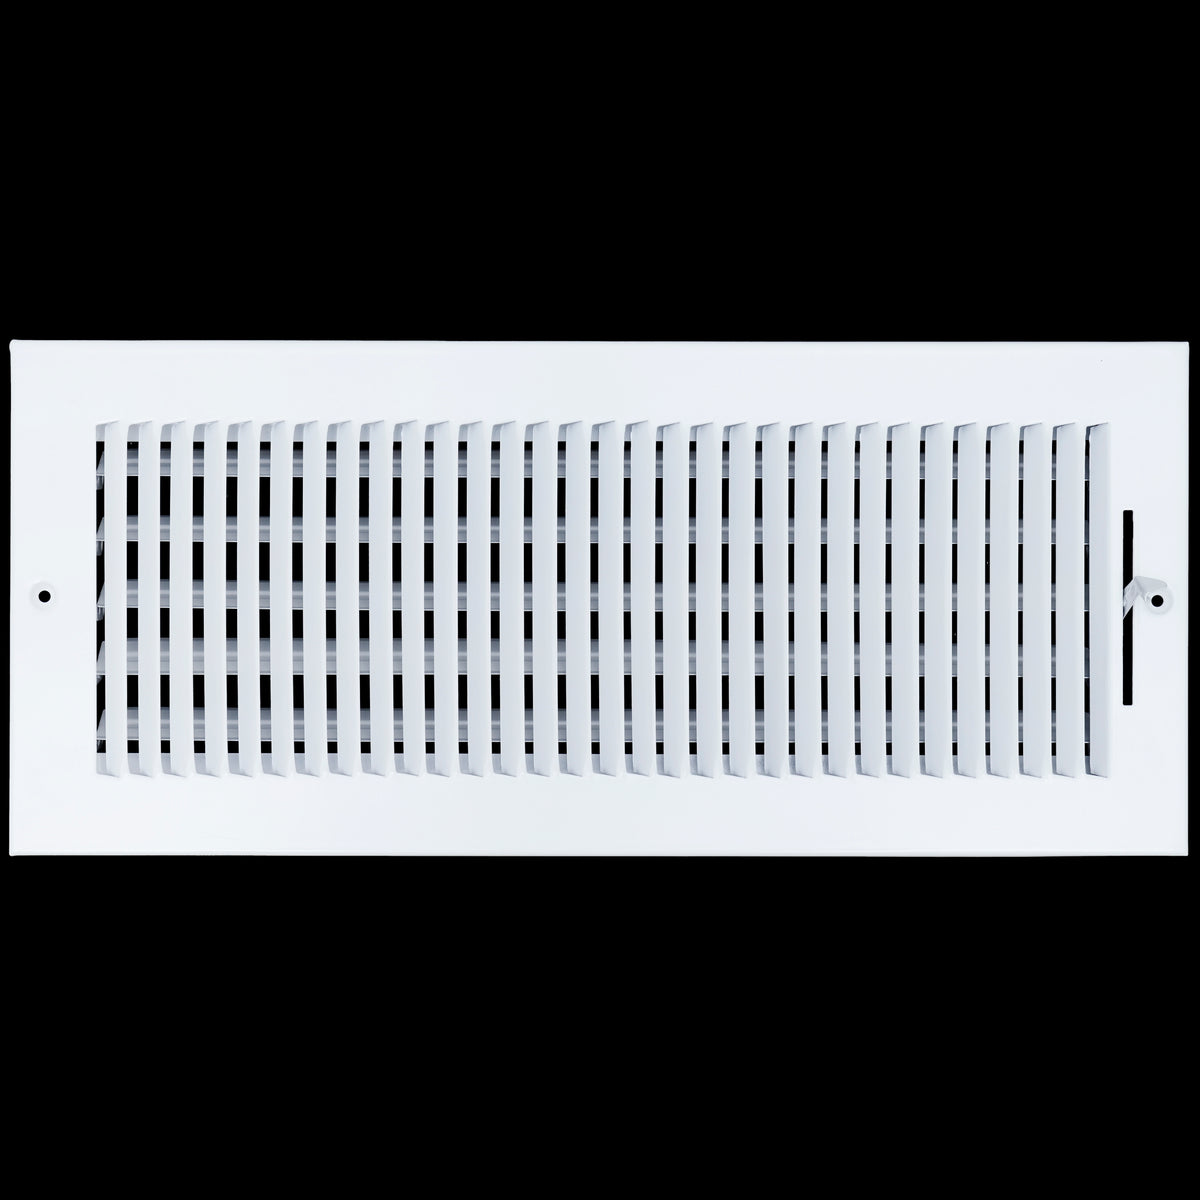 airgrilles 16 x 6 duct opening  -  1 way steel air supply diffuser for sidewall and ceiling hnd-asg-wh-1way-16x6 764613097771 - 1